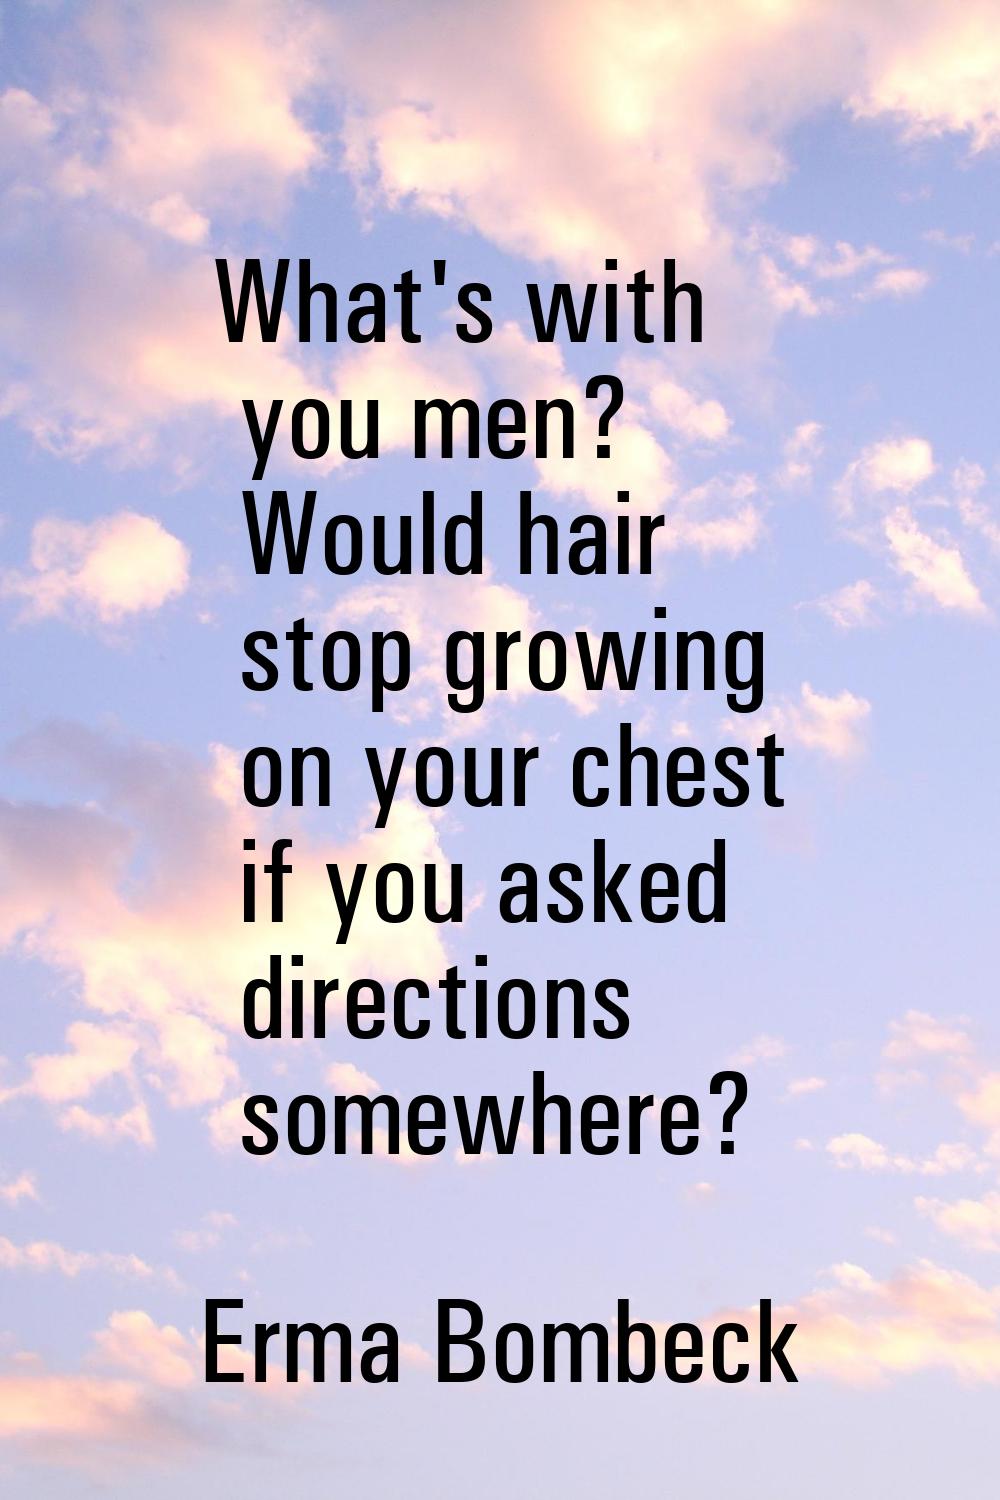 What's with you men? Would hair stop growing on your chest if you asked directions somewhere?